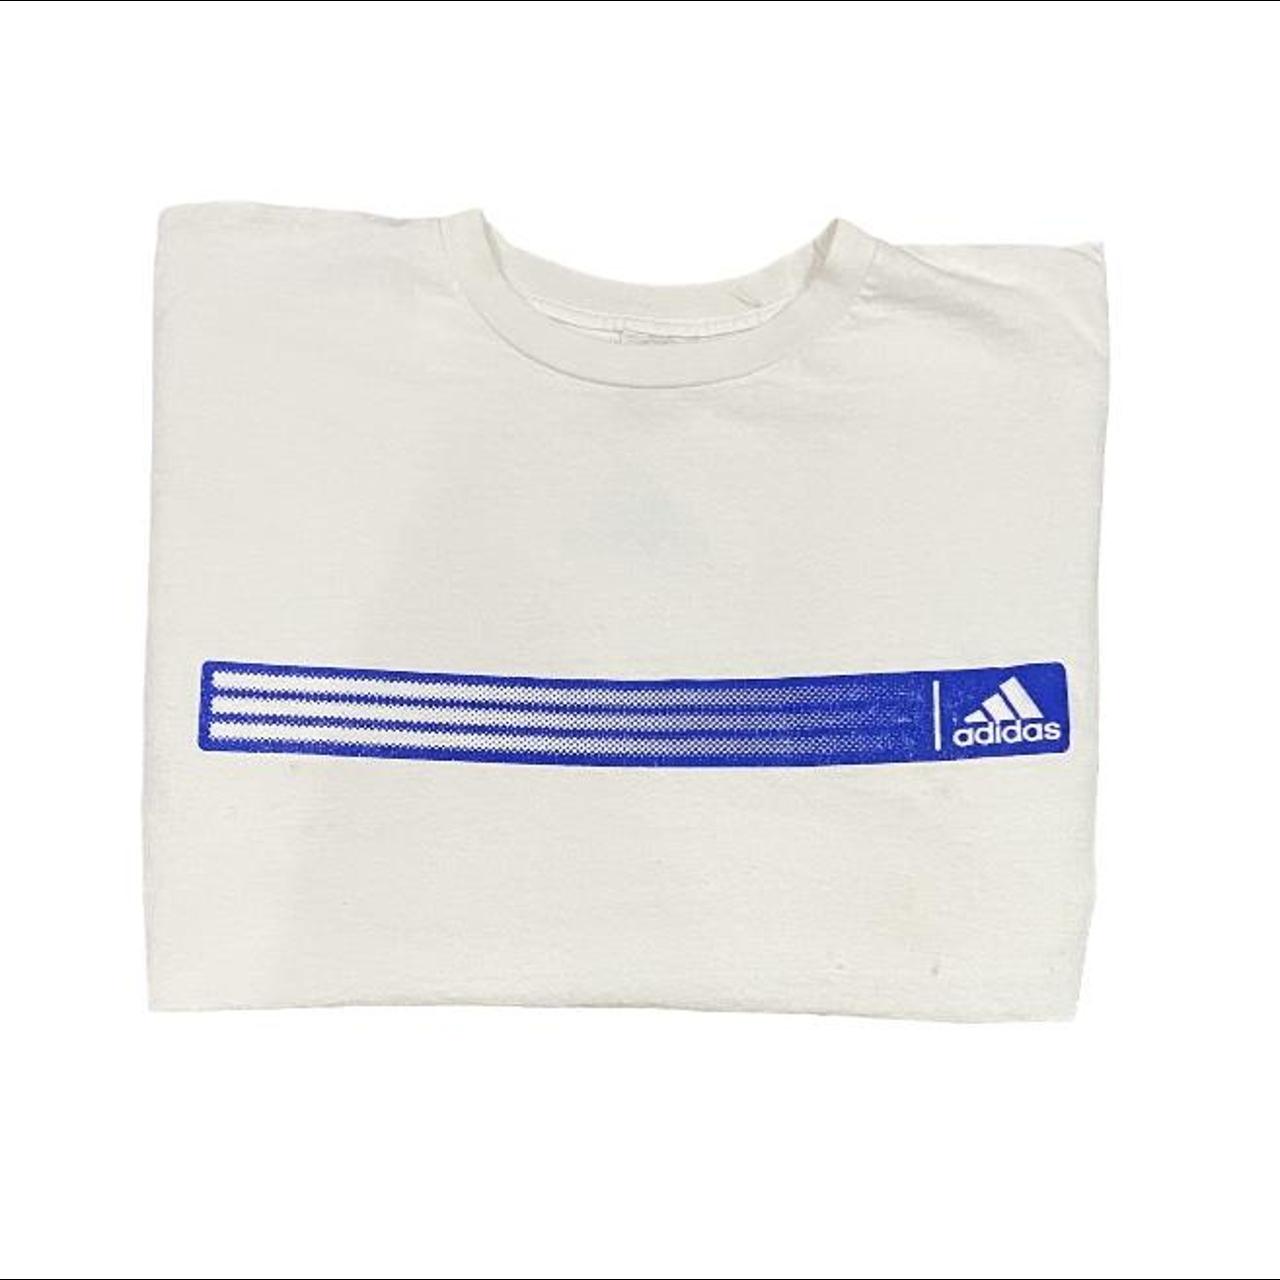 Adidas Men's Blue and White T-shirt